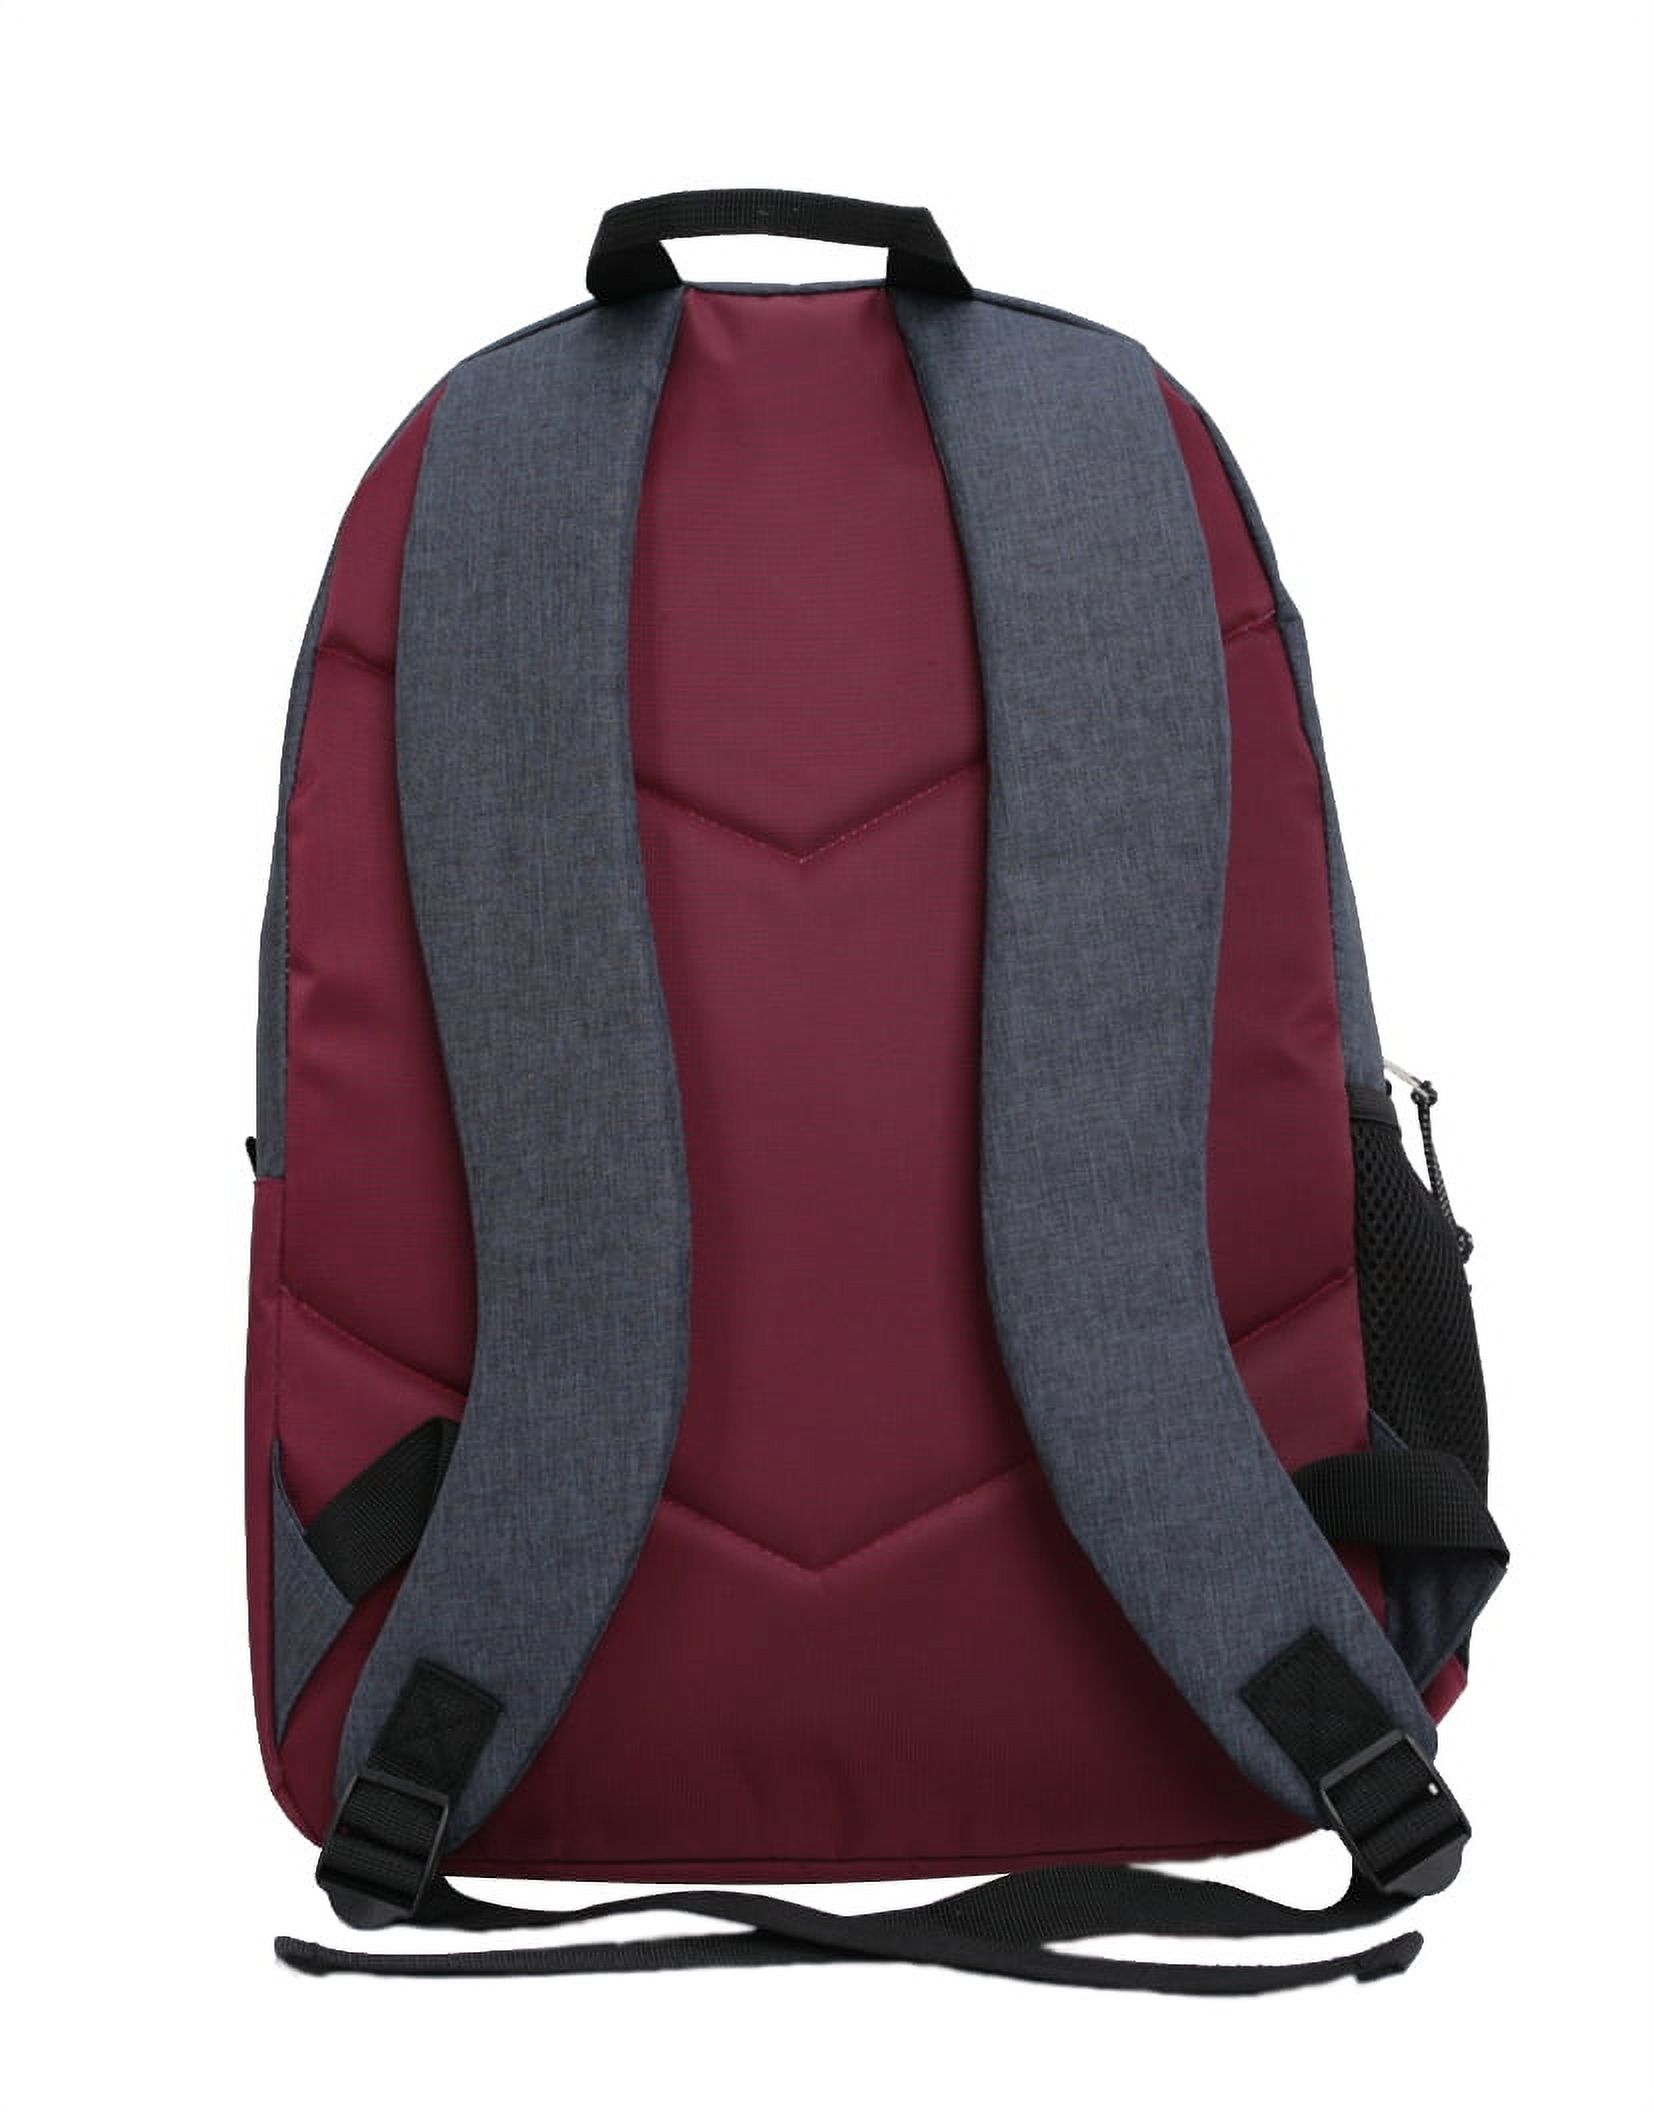 Protege 18" Heather Colorblock Adult Backpack, Navy/Maroon - Unisex - image 3 of 5